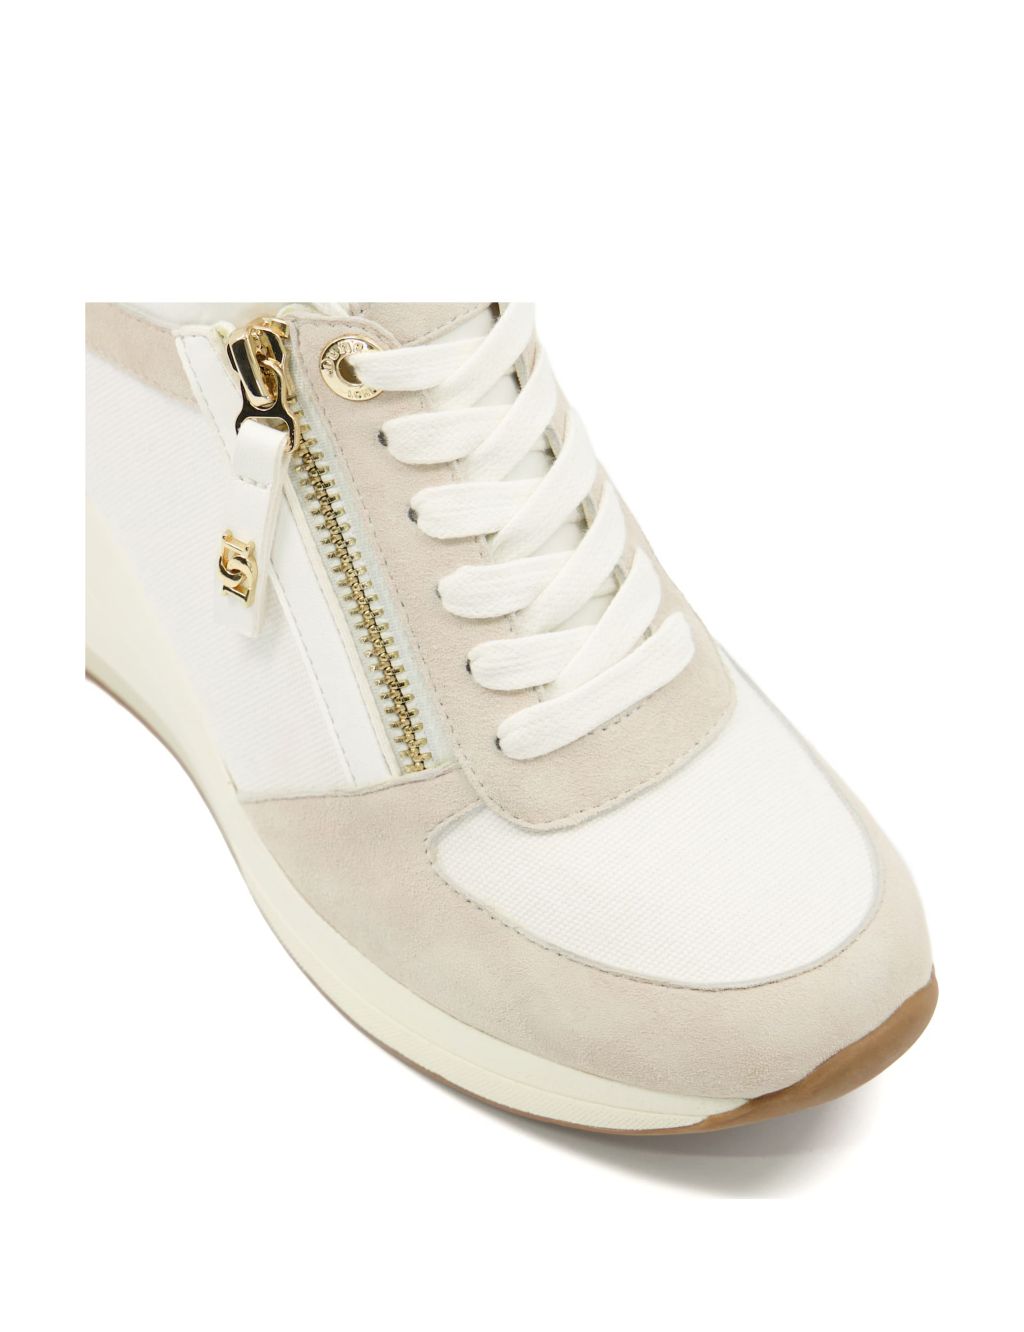 Leather Wedge Suede Panel Trainers image 5